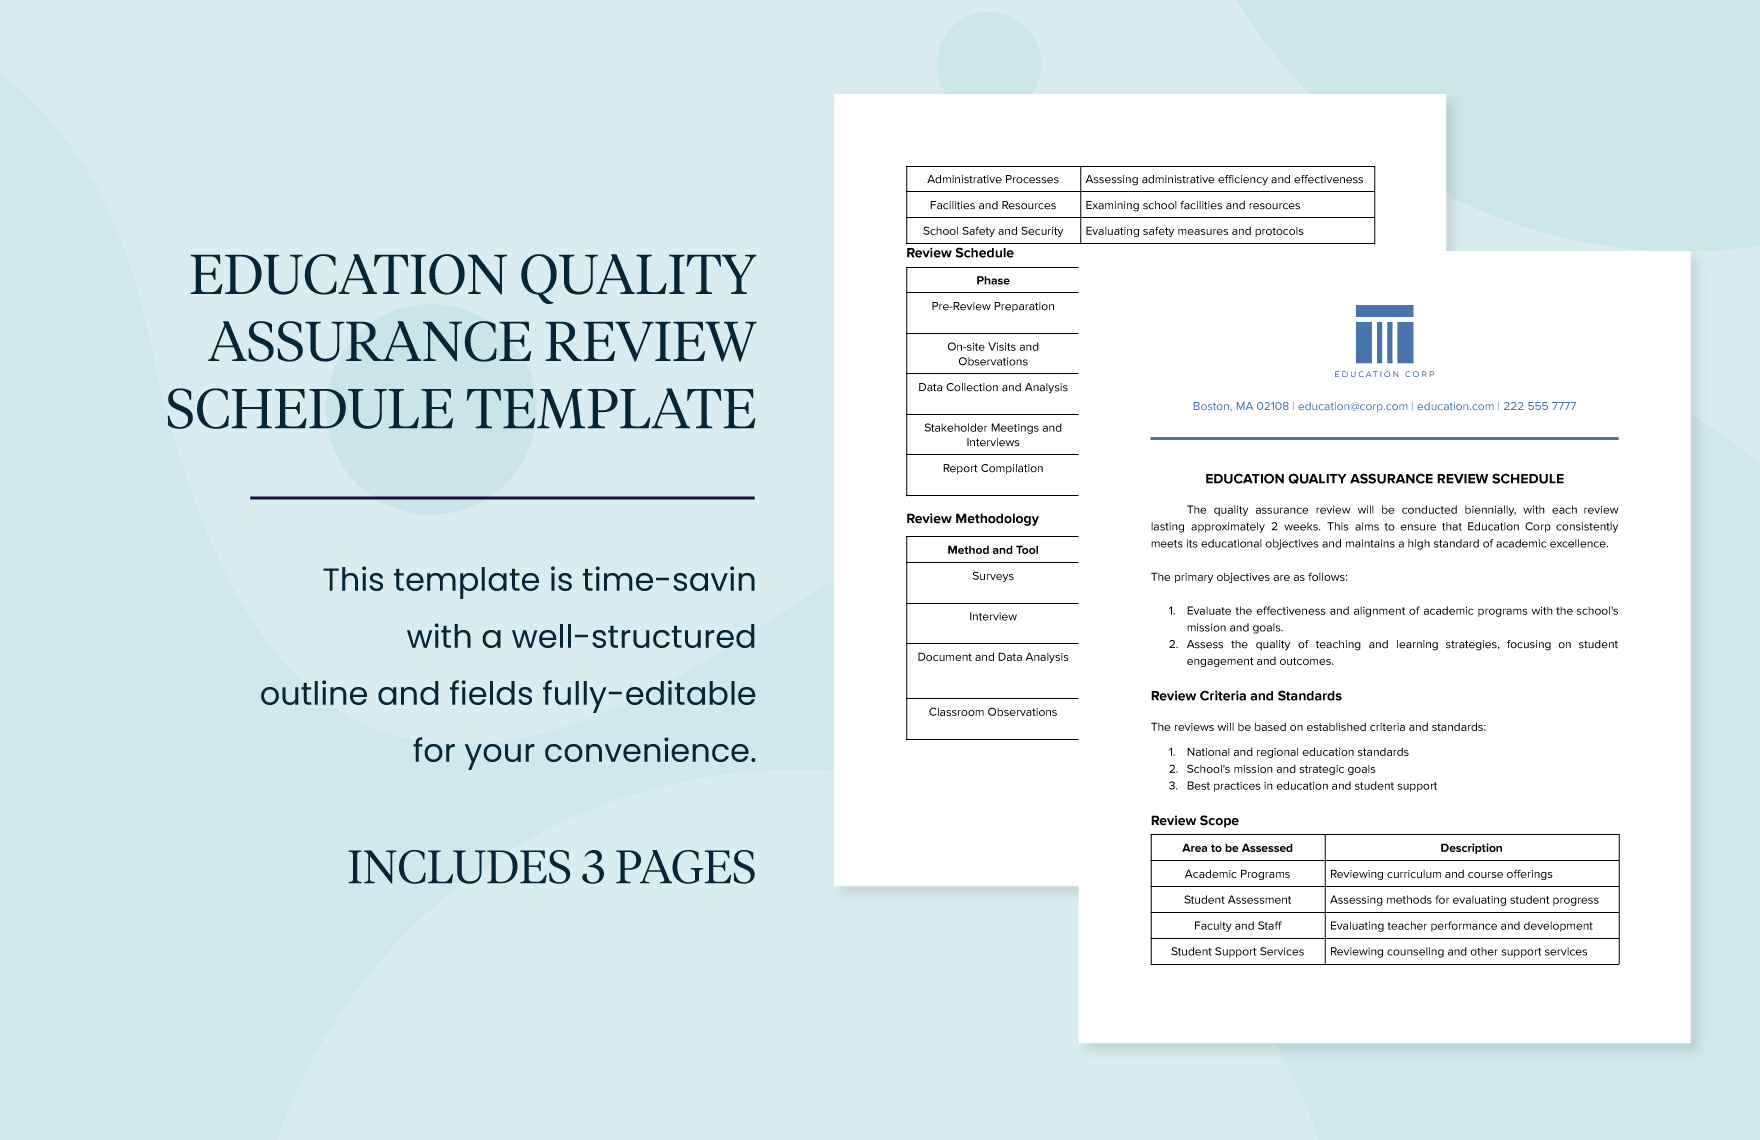 Education Quality Assurance Review Schedule Template in Word, Google Docs, PDF